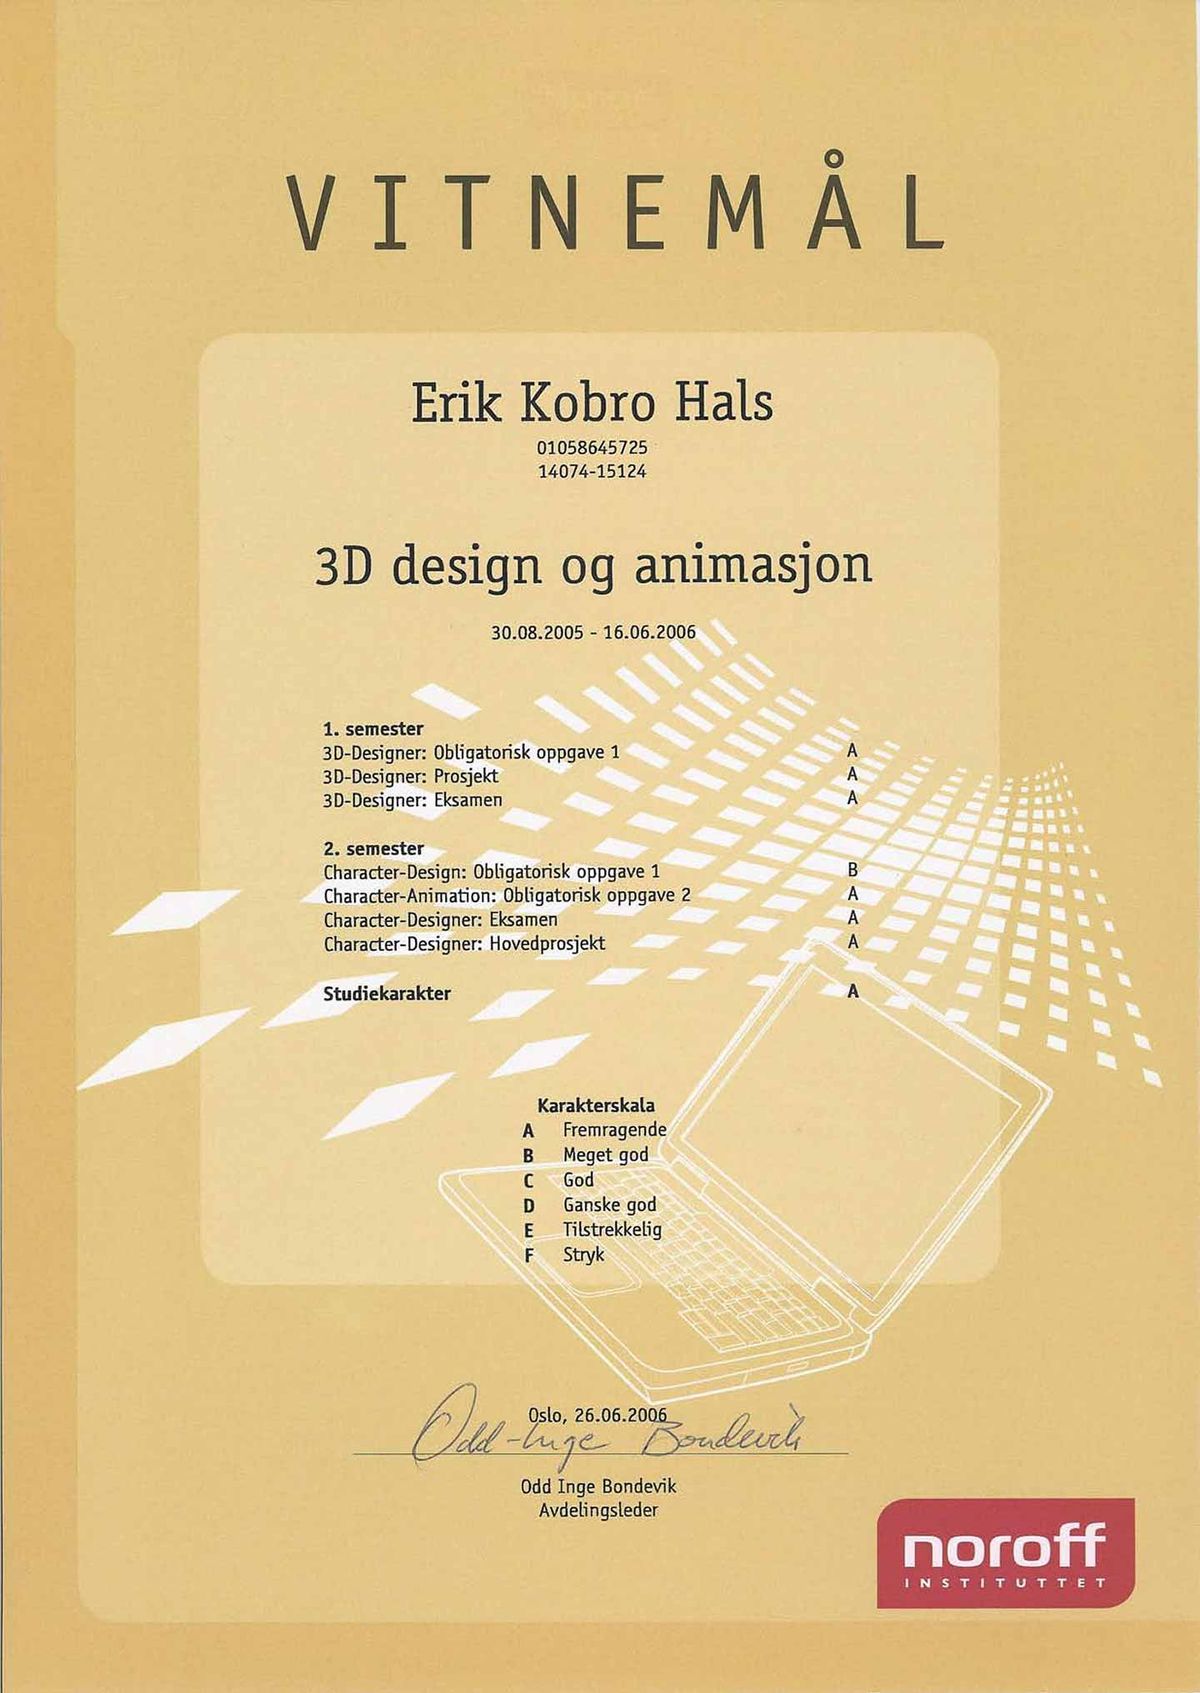 A certificate for 3D design and animation at Noroff